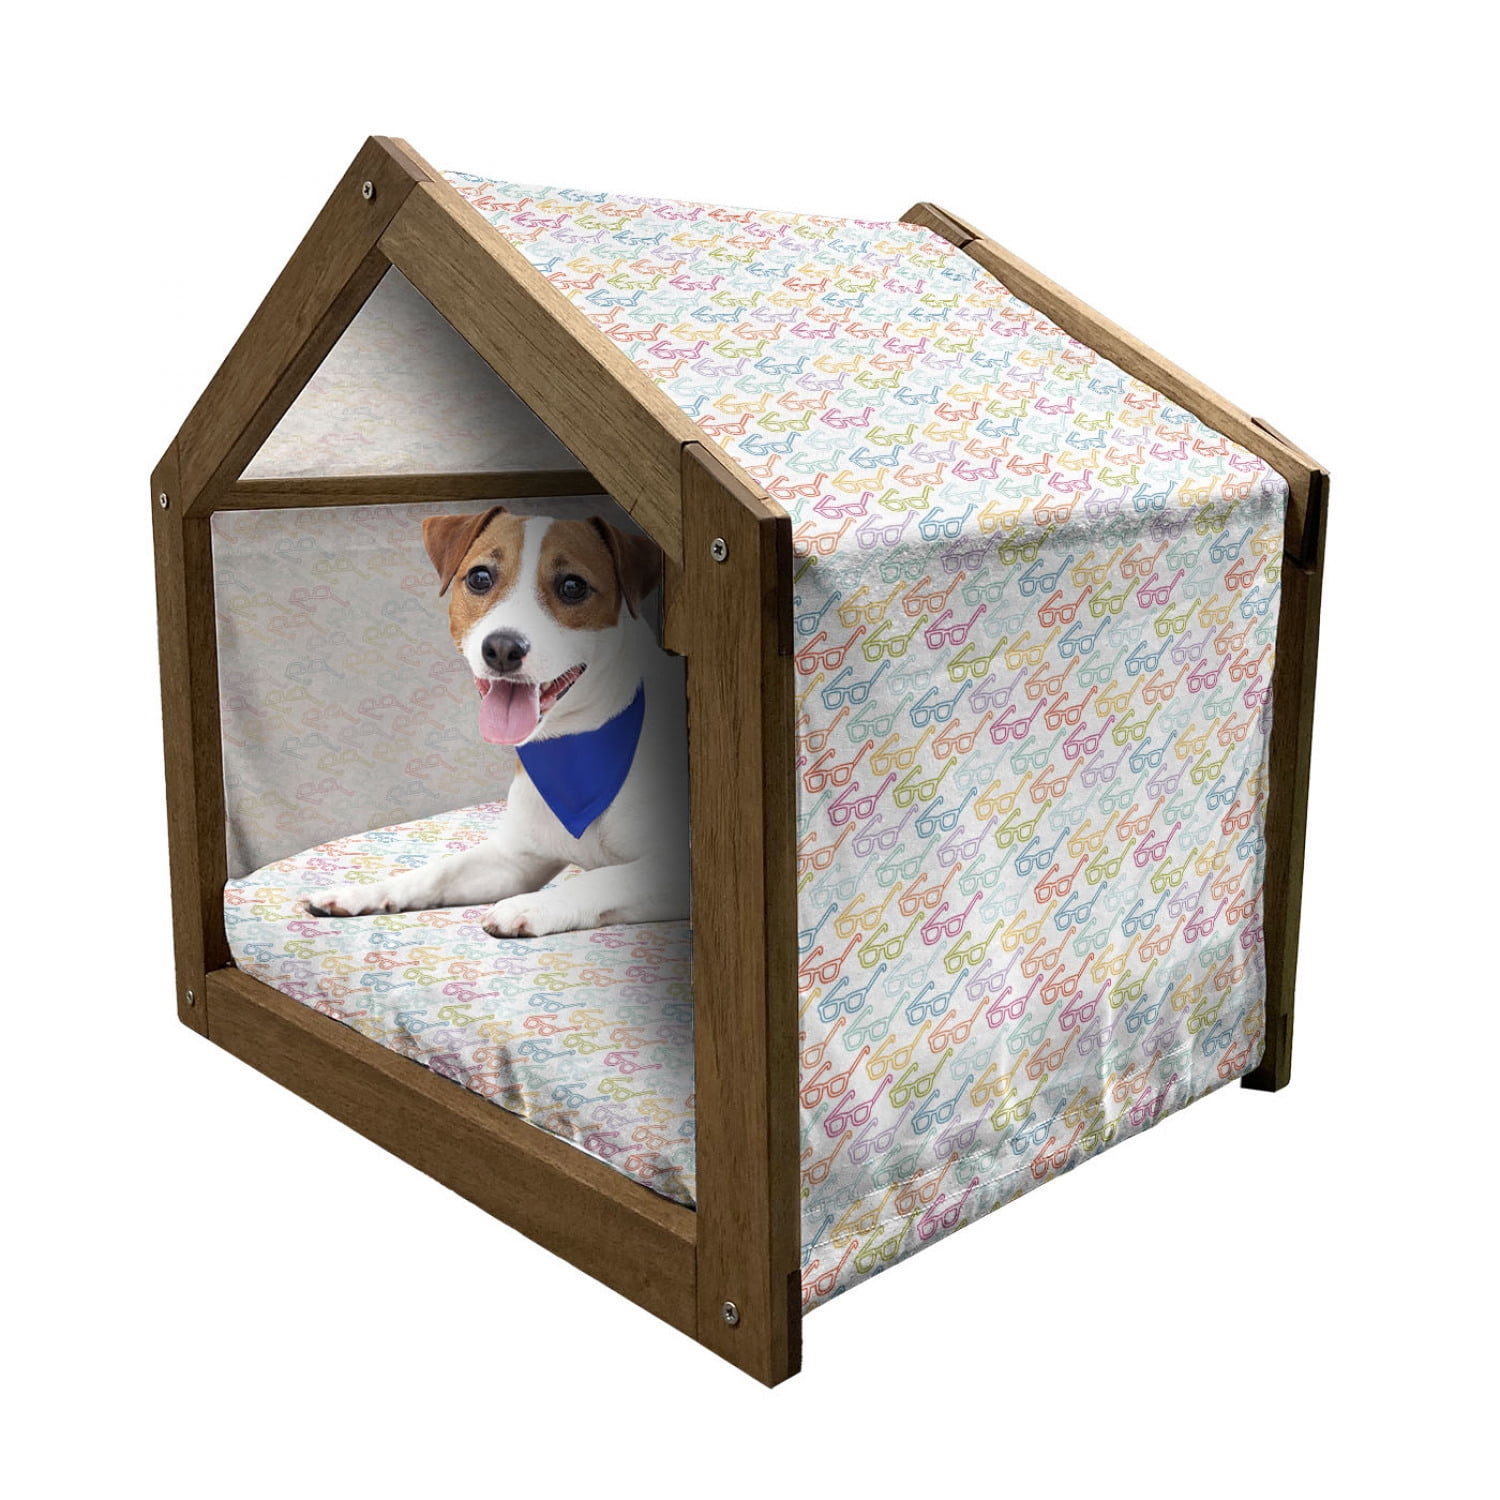 Indie Pet House, Colorful Pattern with Classical Old Eyeglasses Nerd Smart Hipster Doodle, Outdoor & Indoor Portable Dog Kennel with Pillow and Cover, 5 Sizes, by Ambesonne - Walmart.com